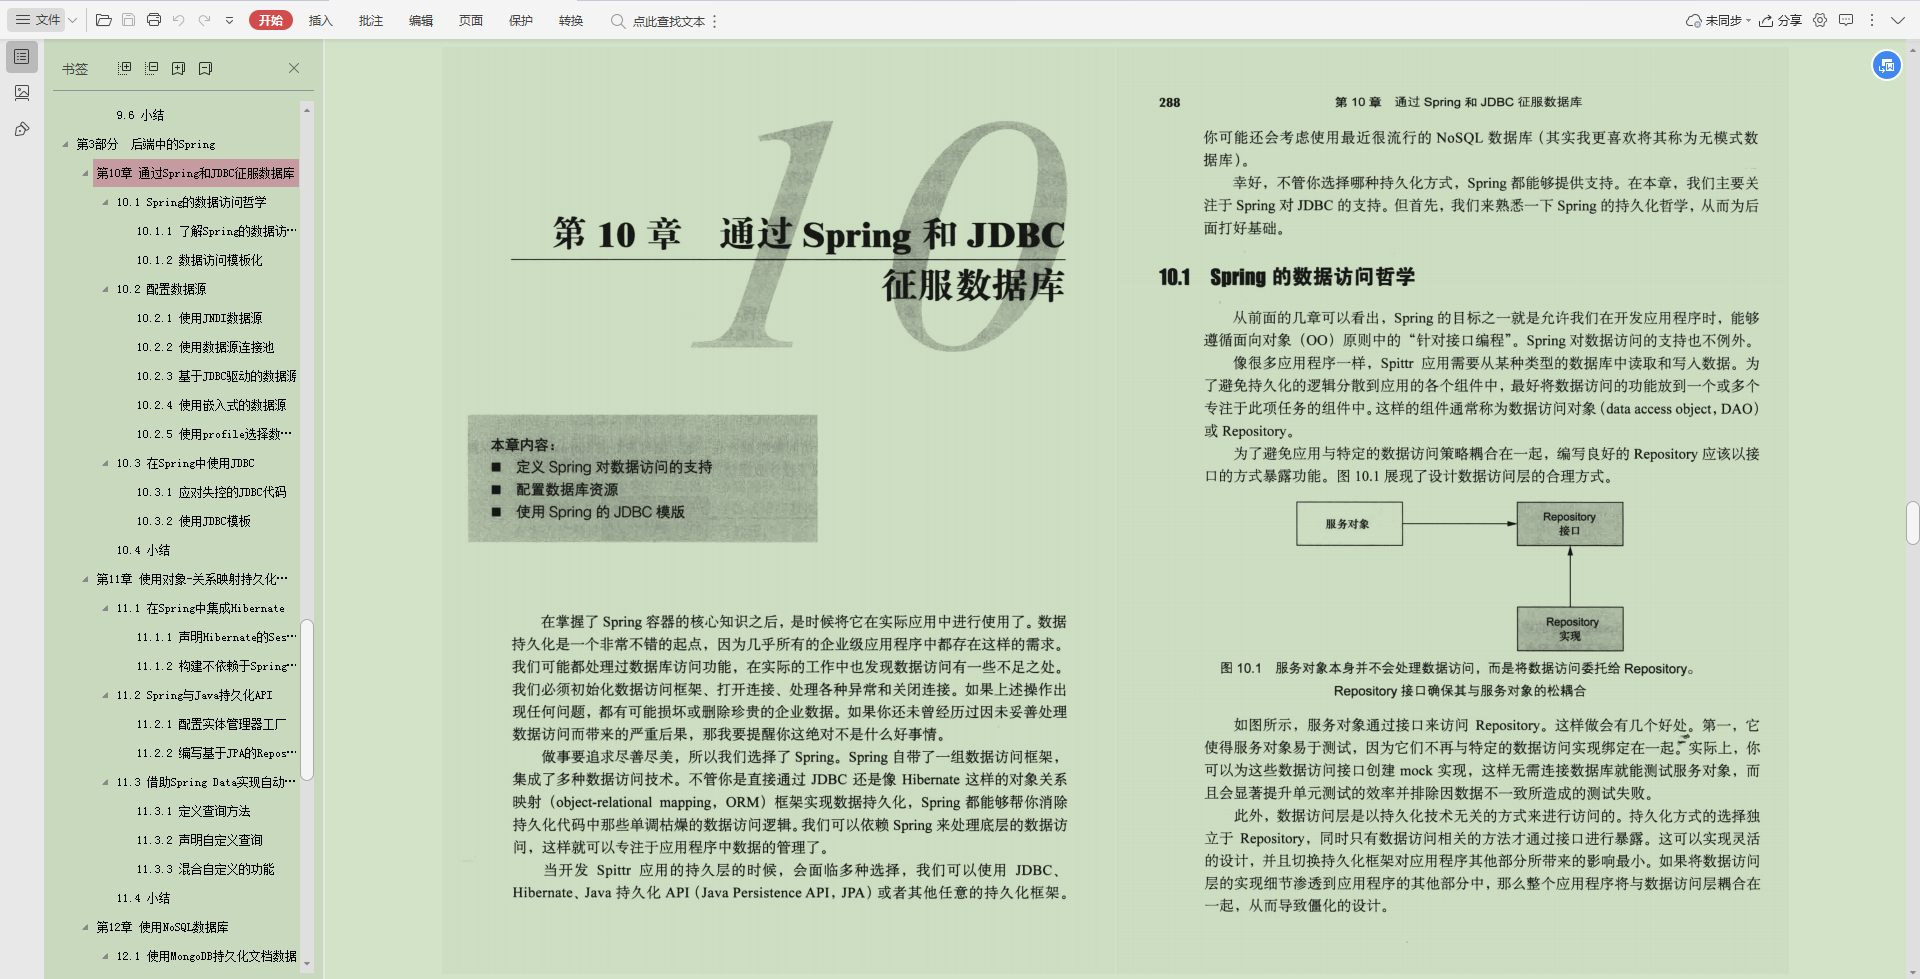 Great!  Alibaba Intranet Spring Manual is too complete, the internal information is really fragrant